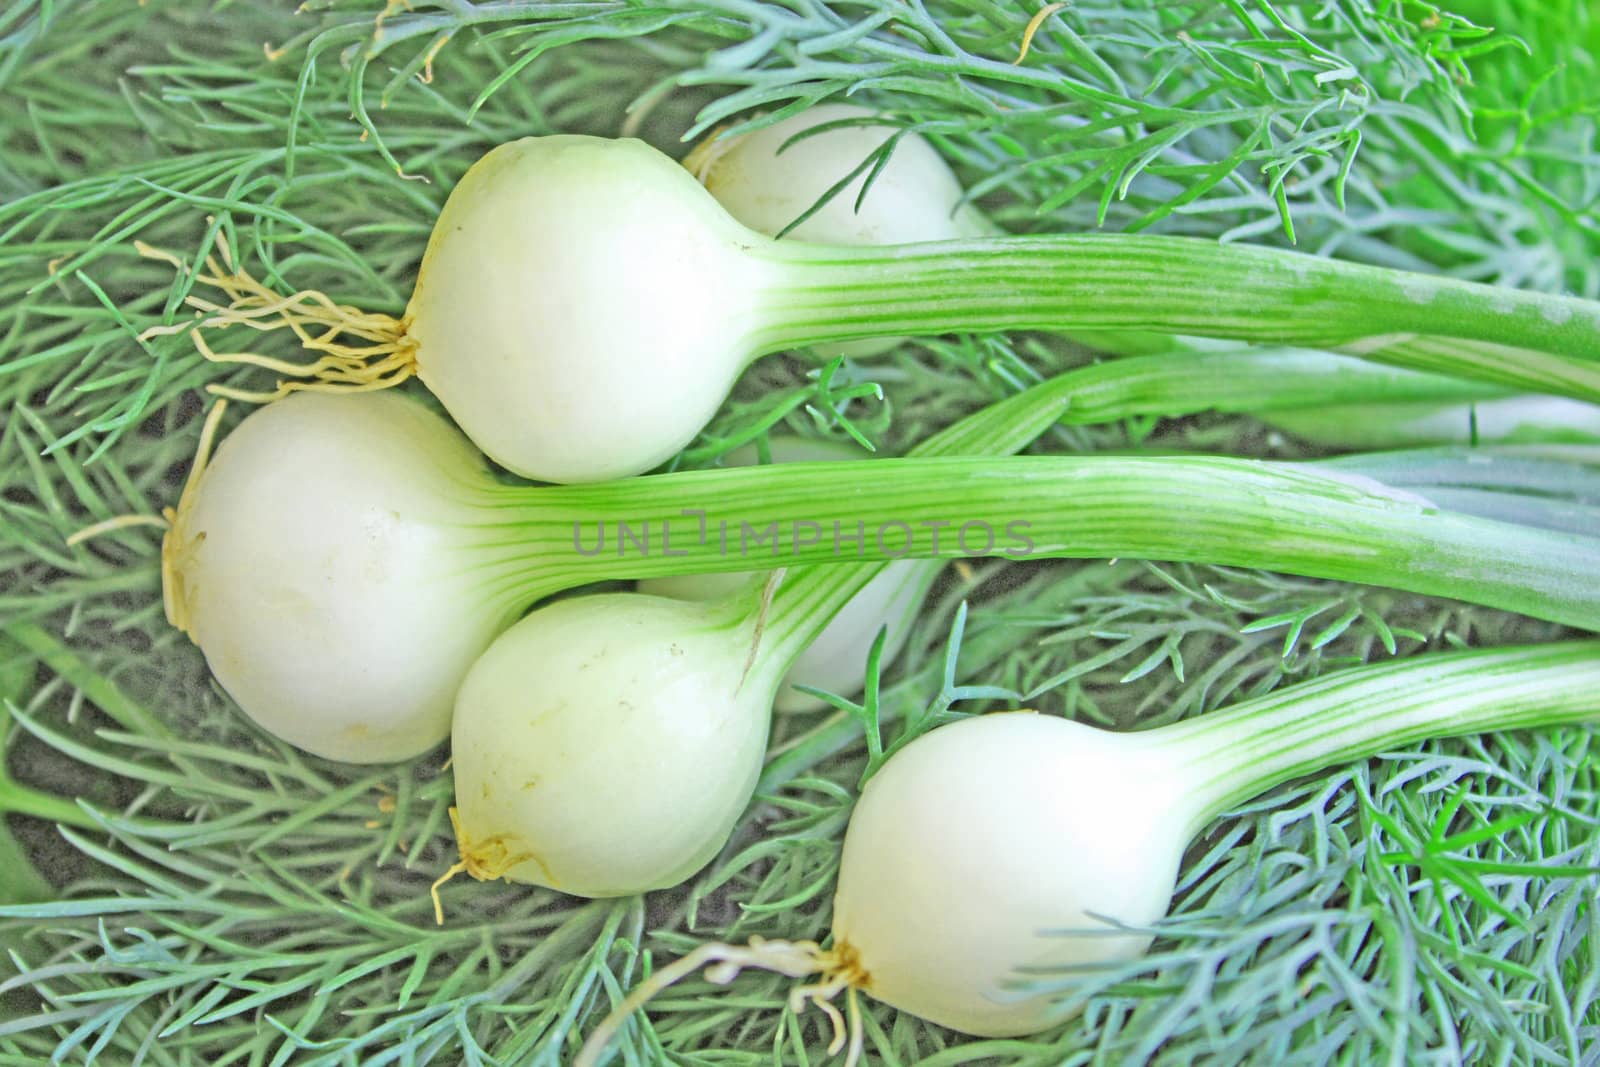 Close up of the onion and green dill